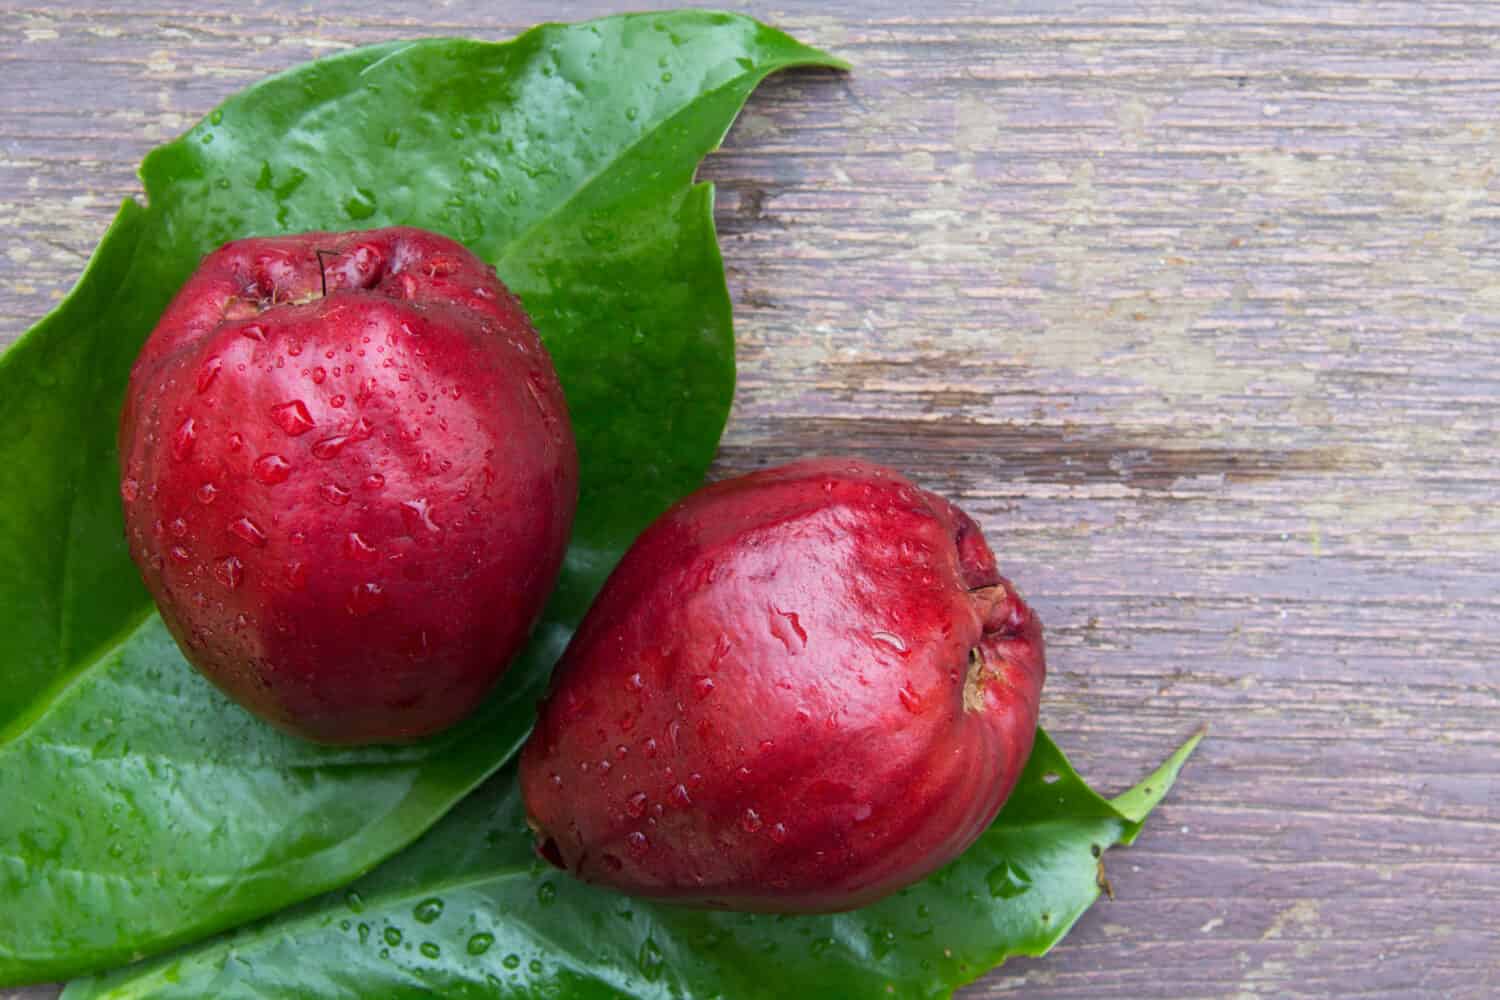 Pomerac fruits (Syzygium malaccense) has other names are Malay Apple, Chompoo Mameaw, Rose apple. It's pear-like fruit with calyx attached to end of fruit, dark red color, placed on its green leaves.